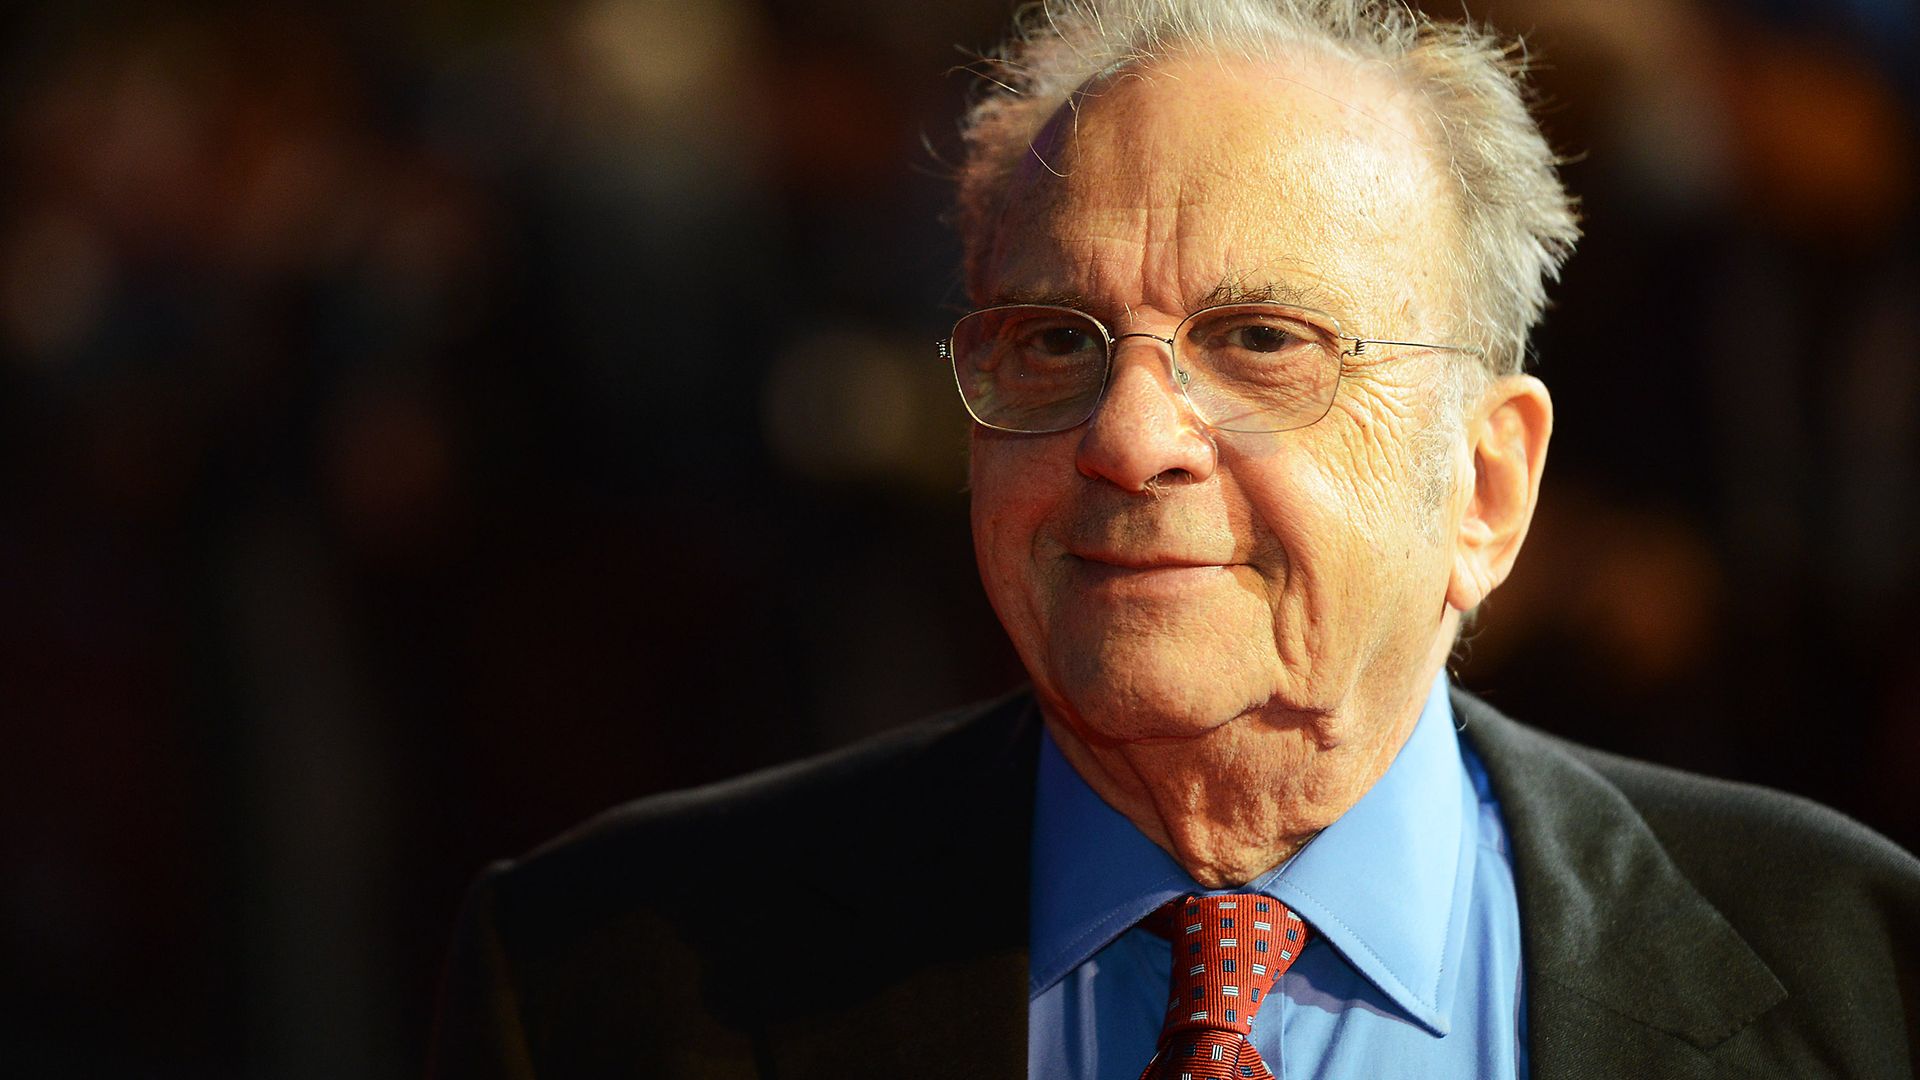 Ronald Harwood at the premiere of Quartet at Odeon Leicester Square in 2012 - Credit: Getty Images